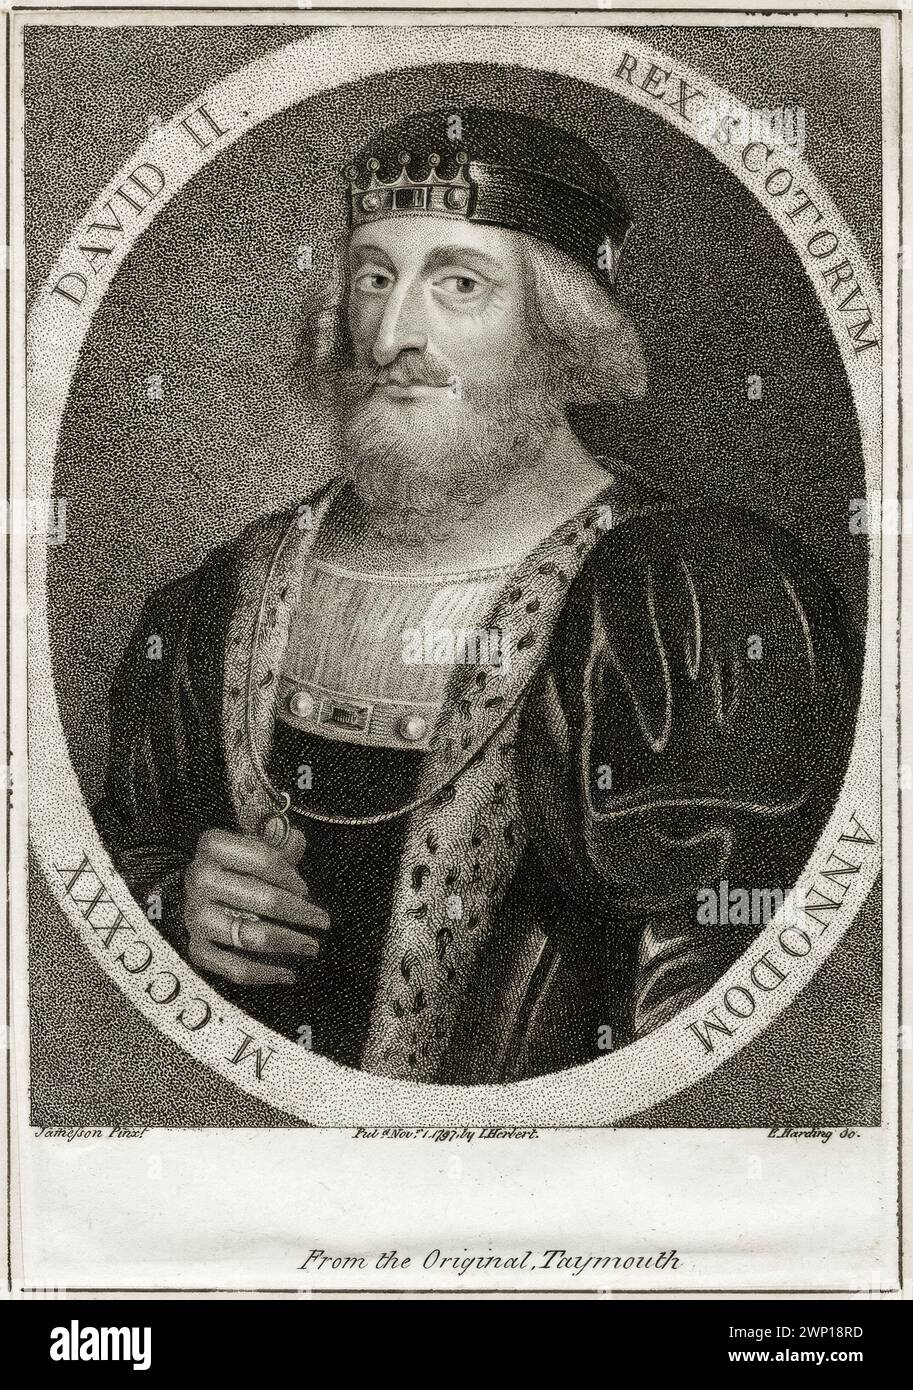 David II of Scotland (1324-1371) King of Scotland 1329-1371, portrait engraving by Edward Harding after Jamesson, 1797 Stock Photo